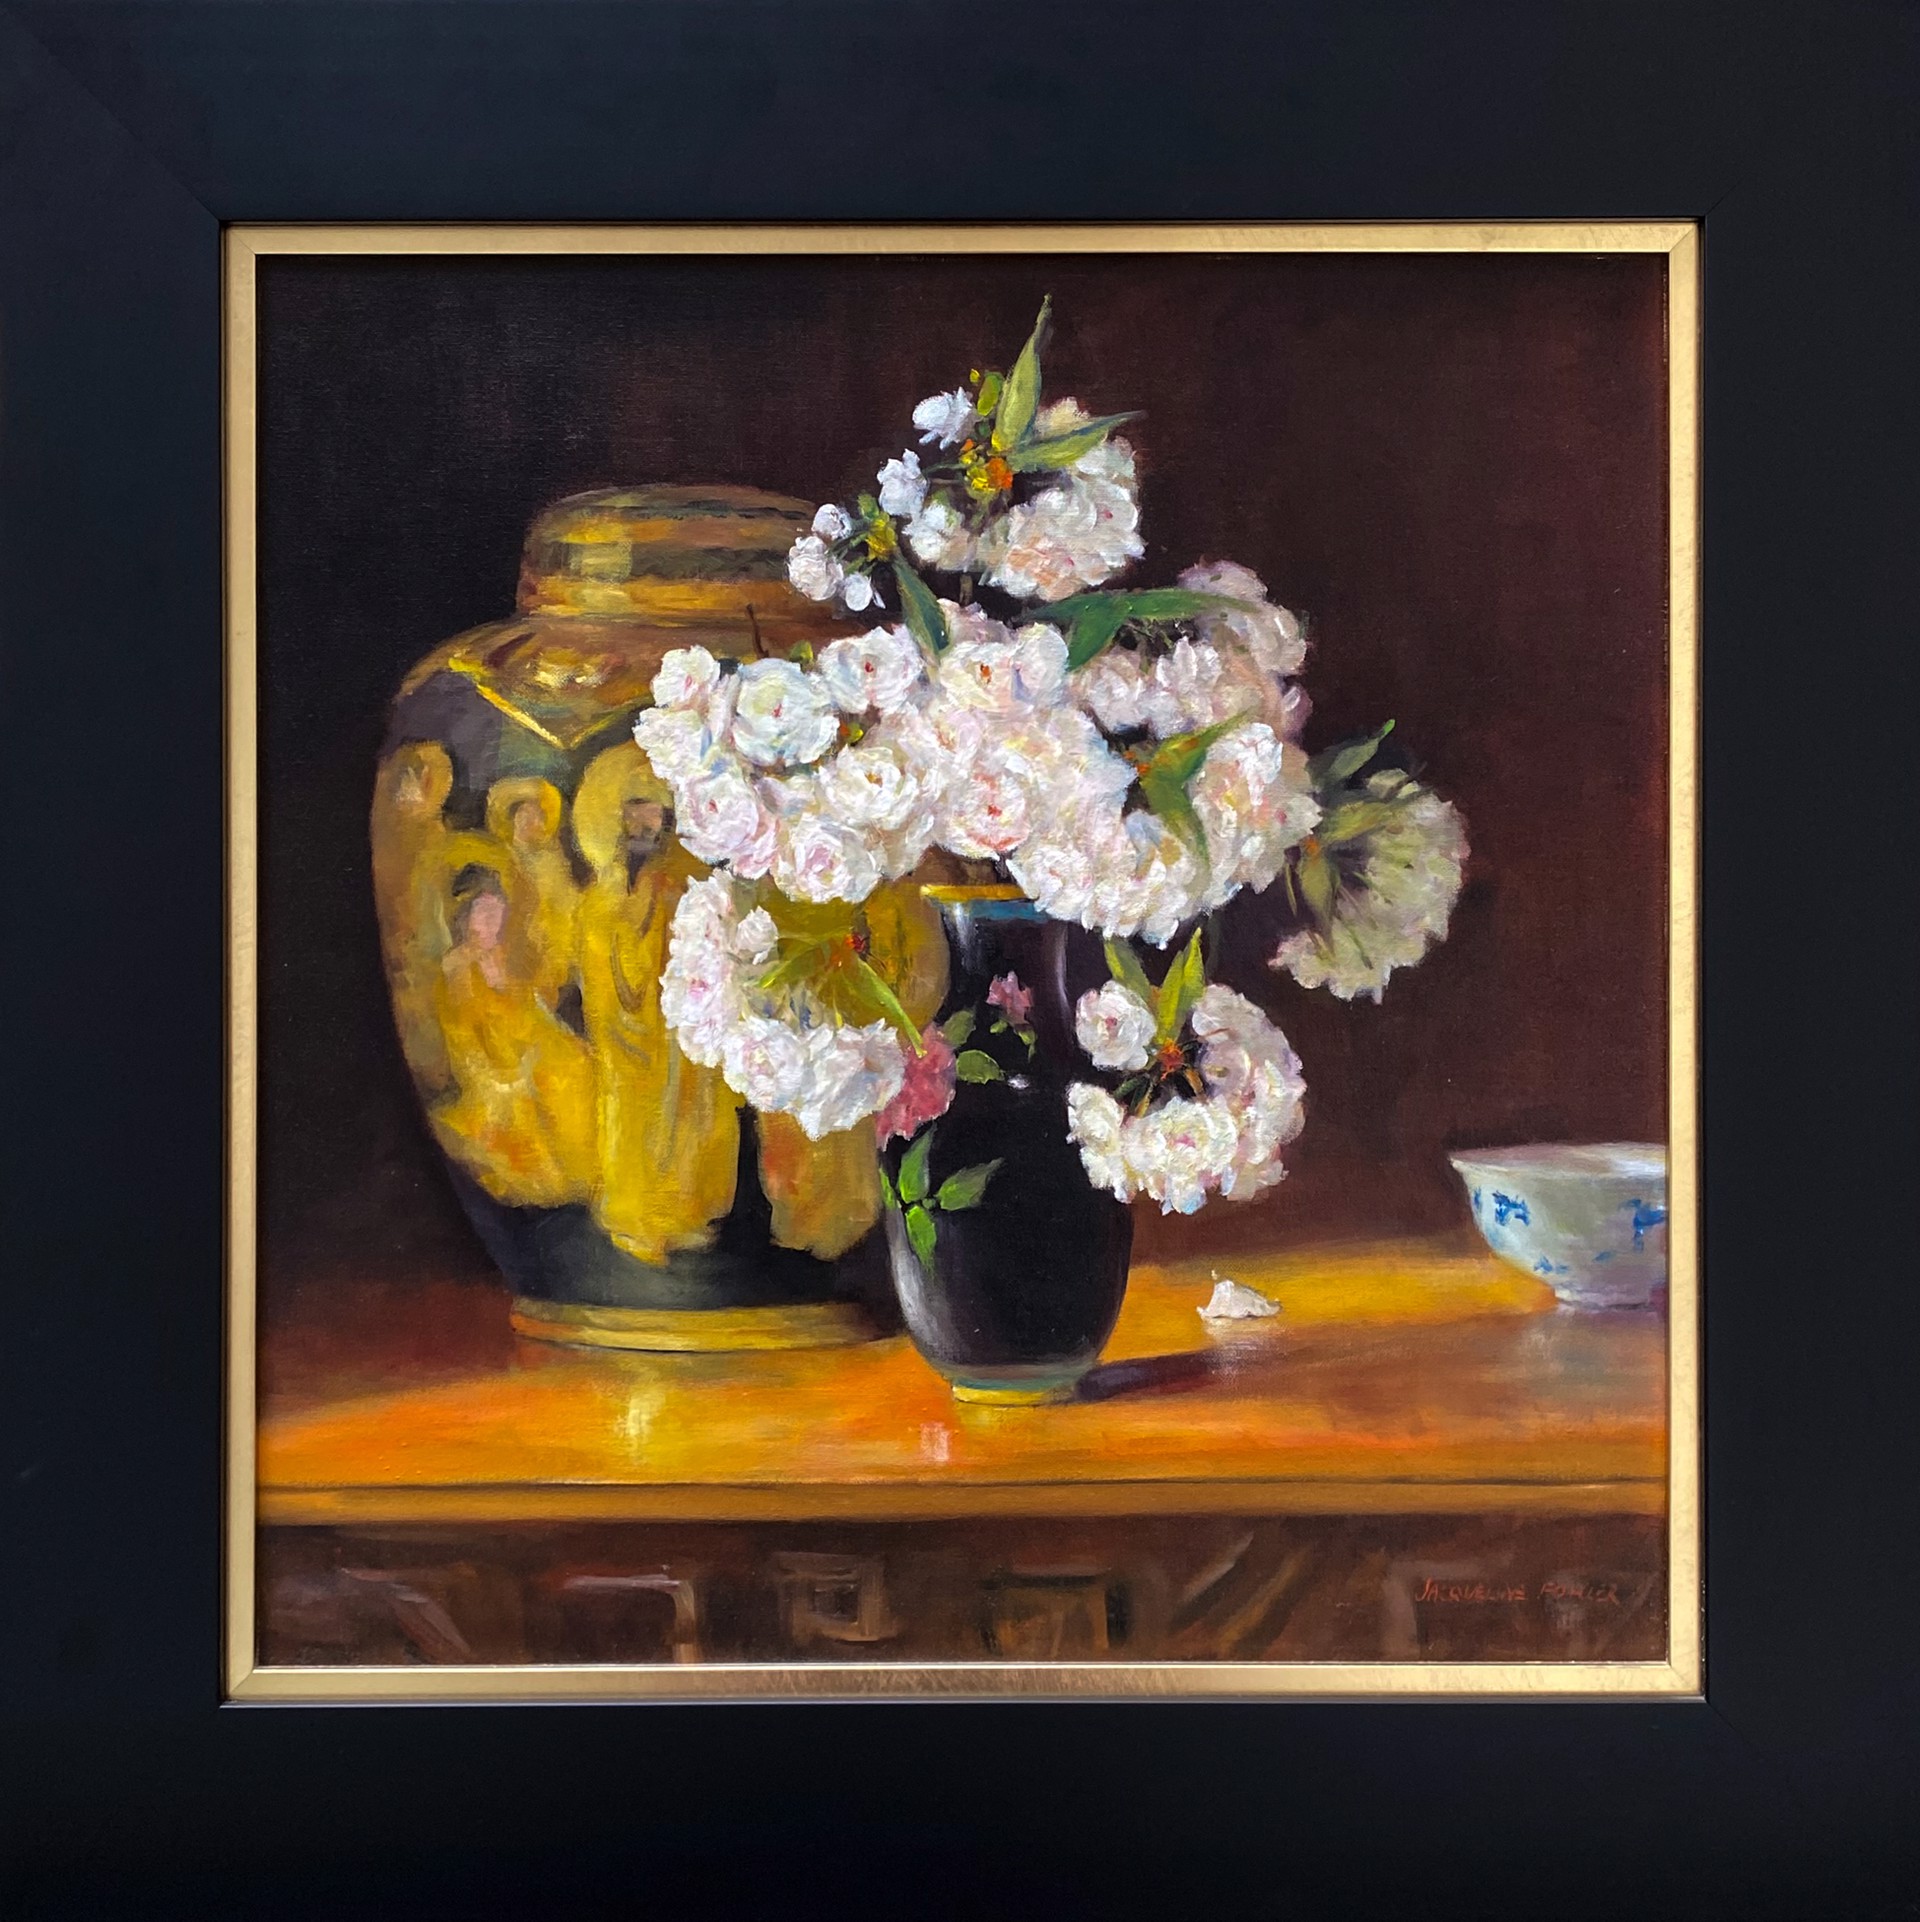 Satsuma Vase with Blossoms by Jacqueline Fowler